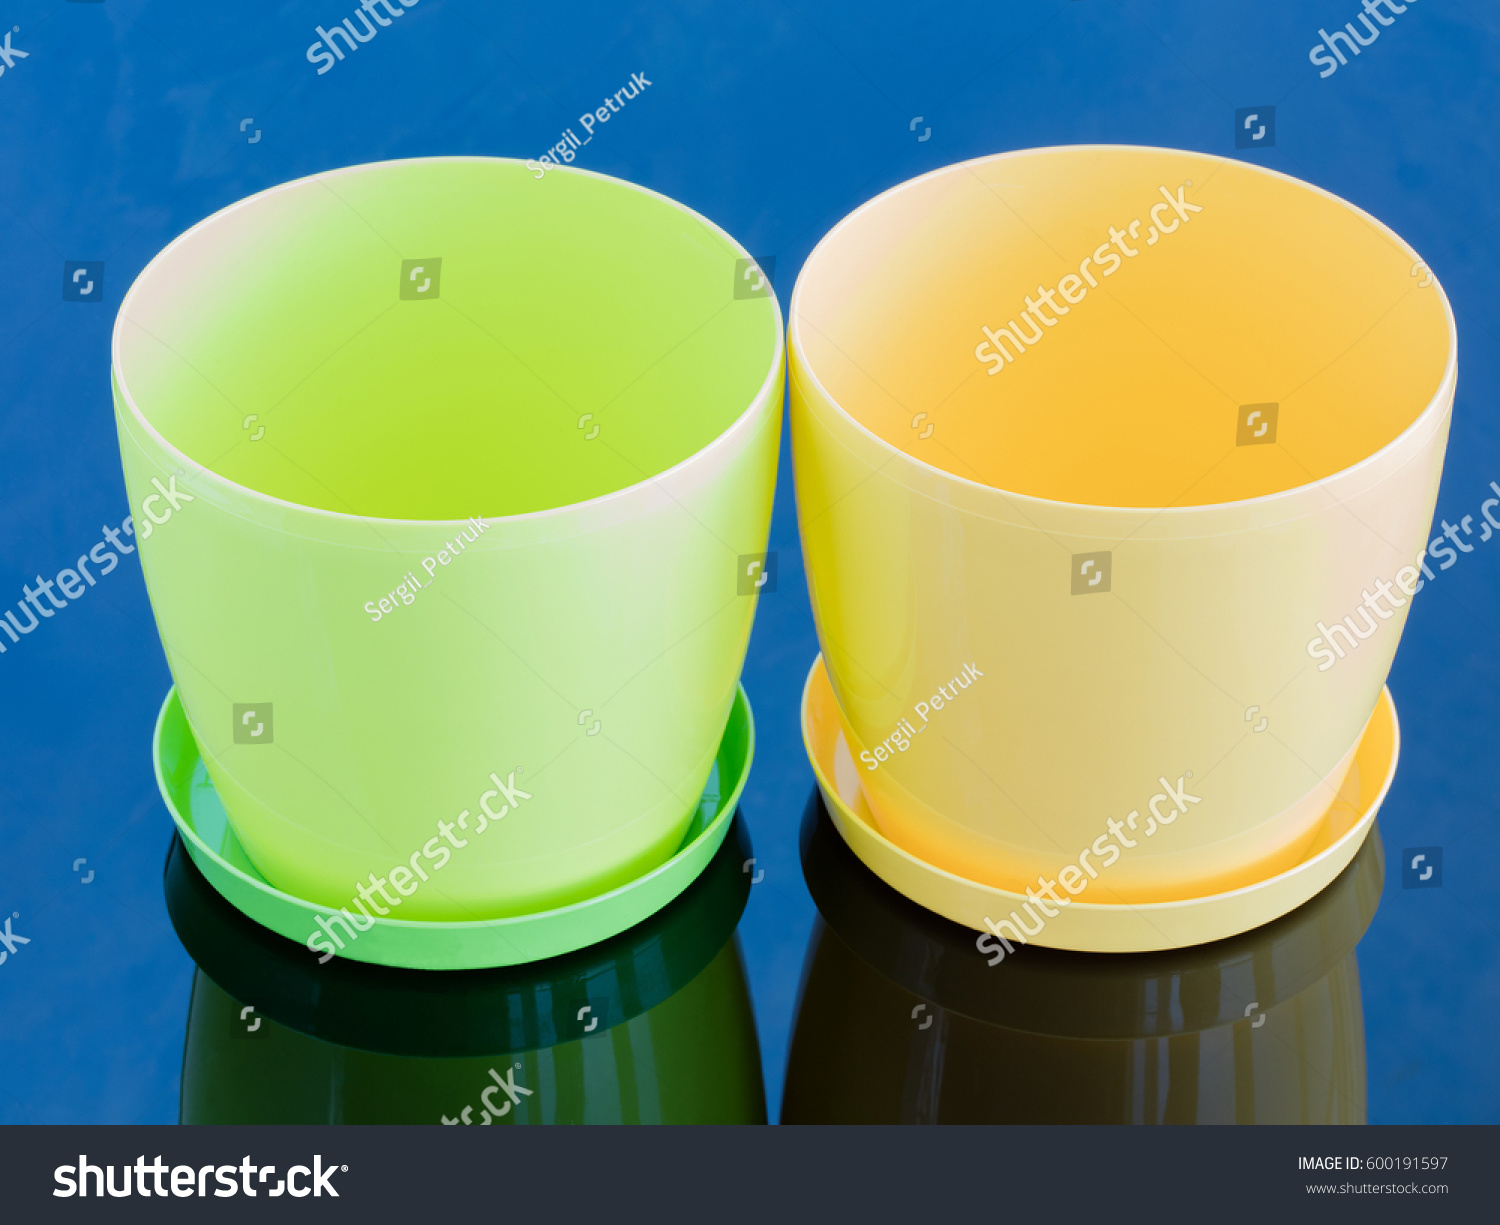 Download Green Yellow Empty Pot On Glossy Objects Stock Image 600191597 Yellowimages Mockups